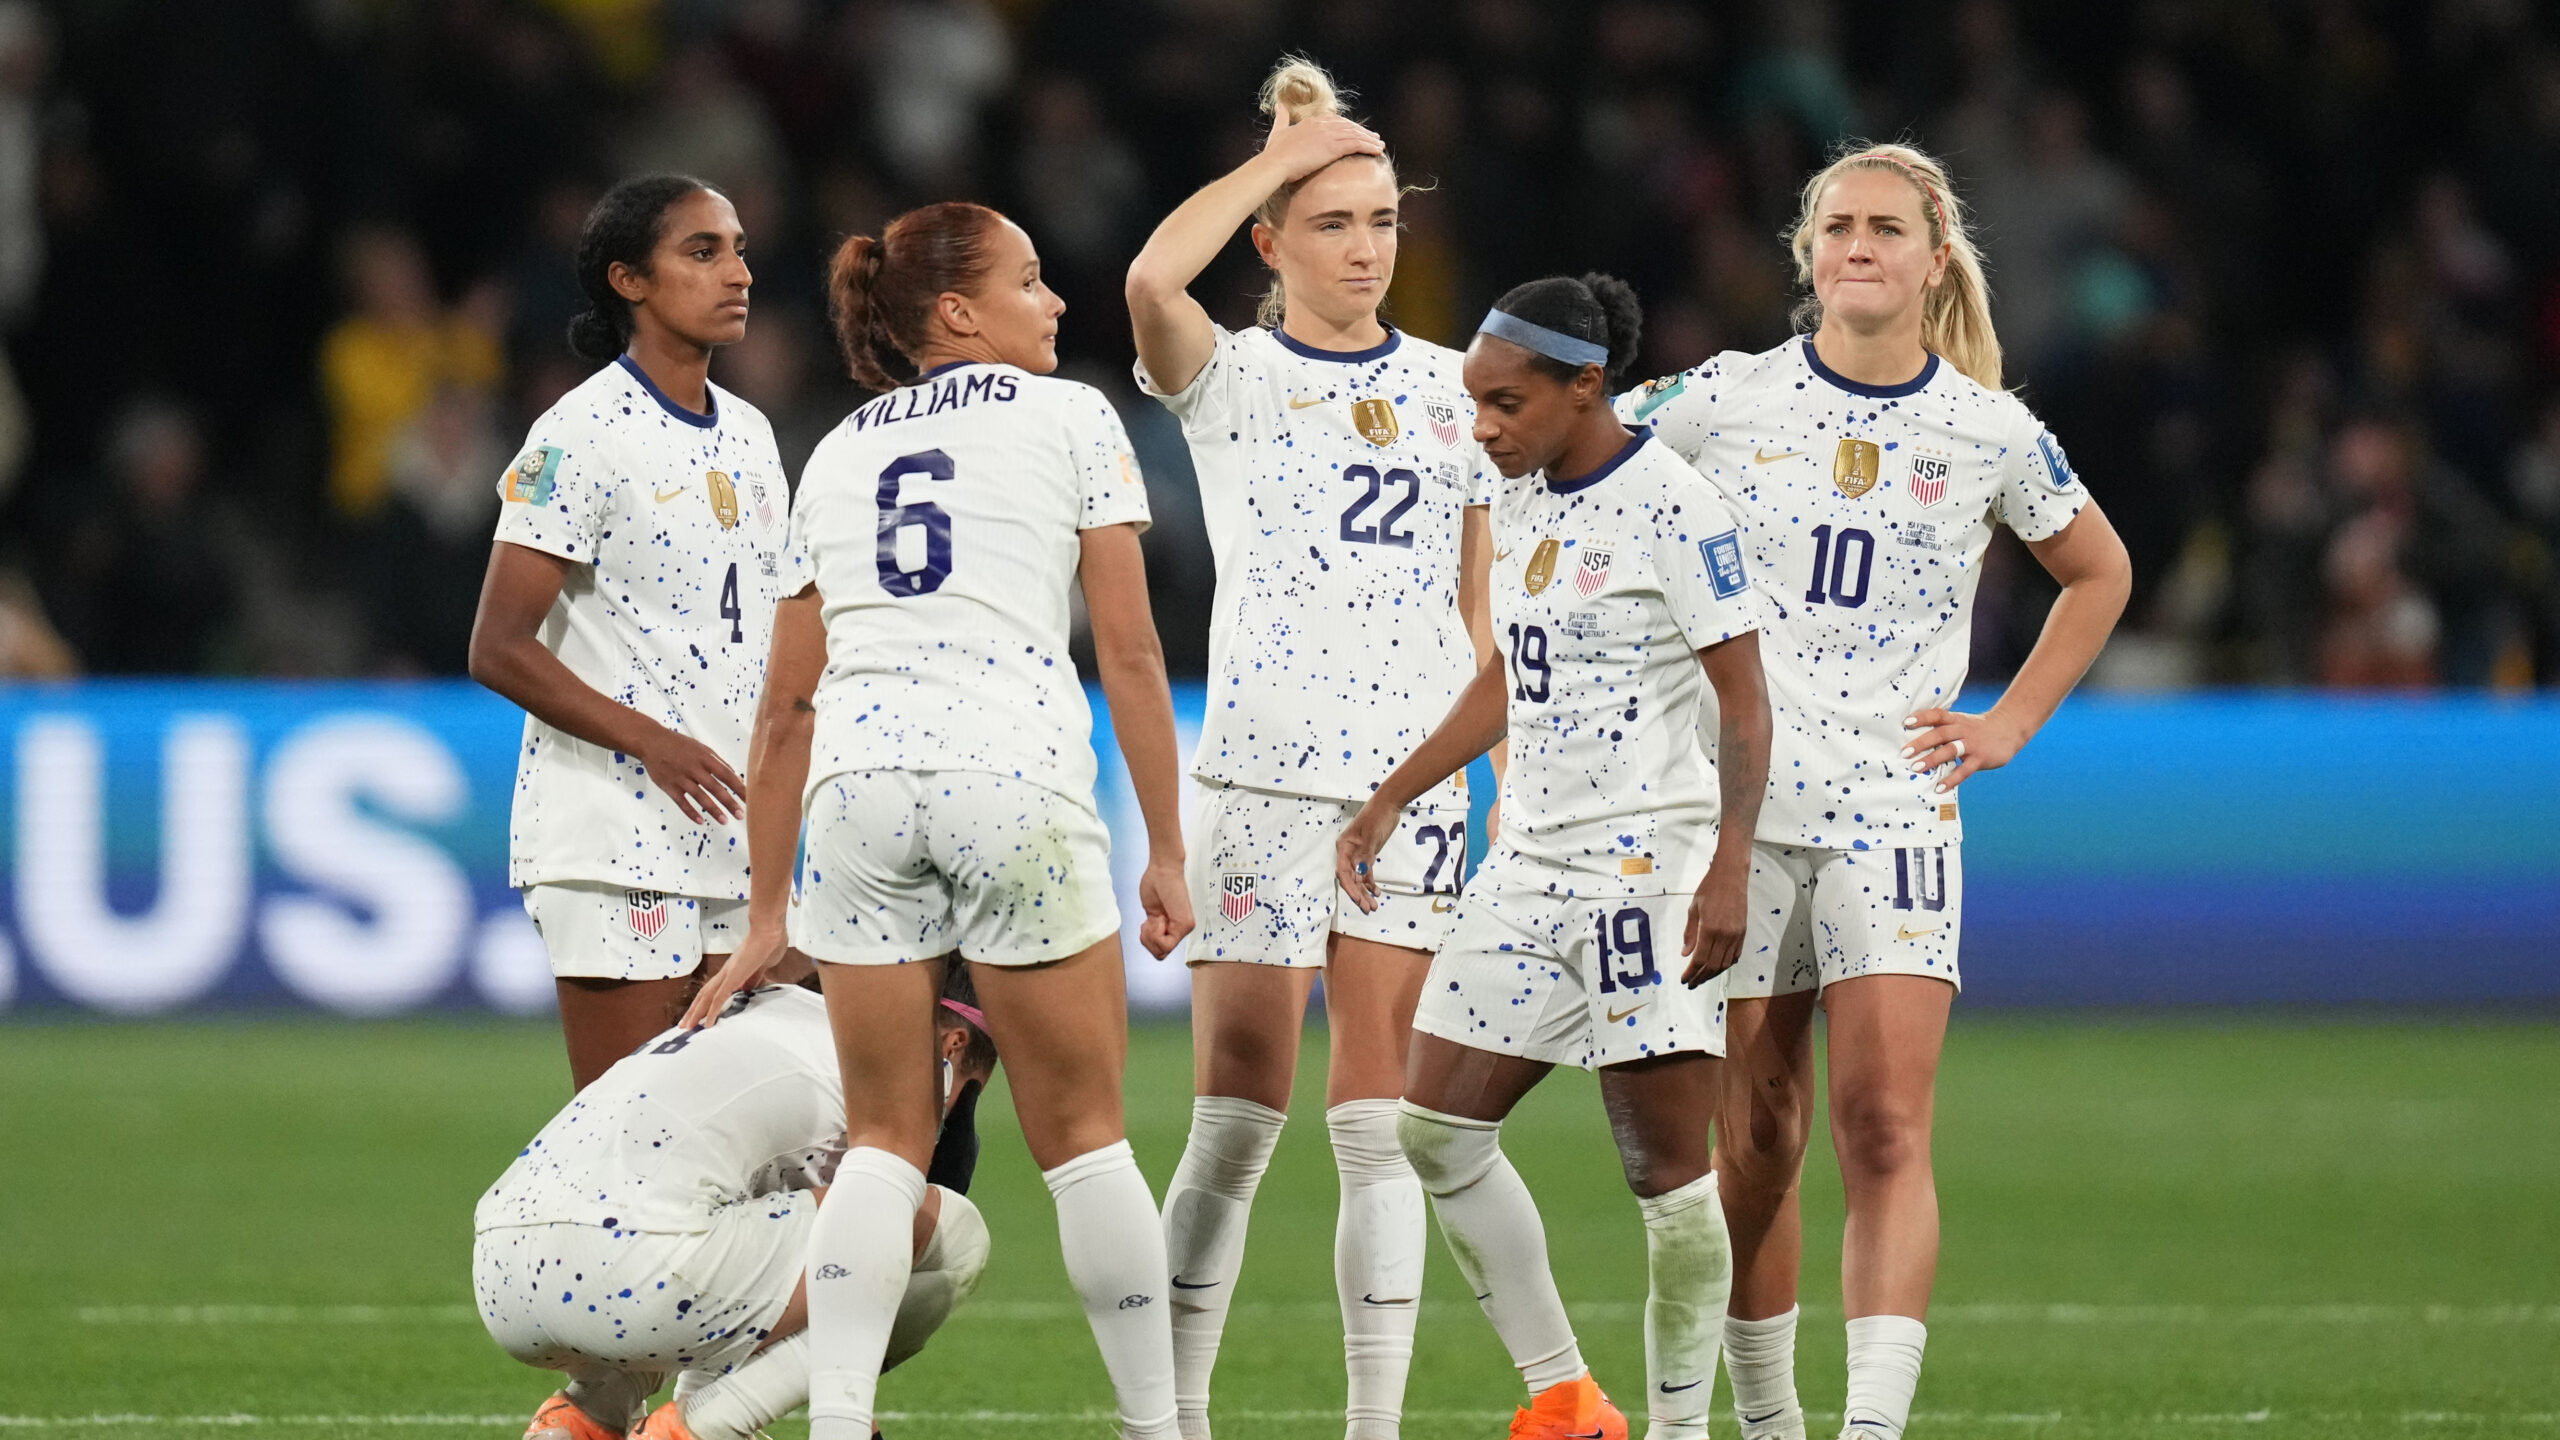 Where Does USA Fit in the Women's International Soccer Pecking Order? BVM Sports